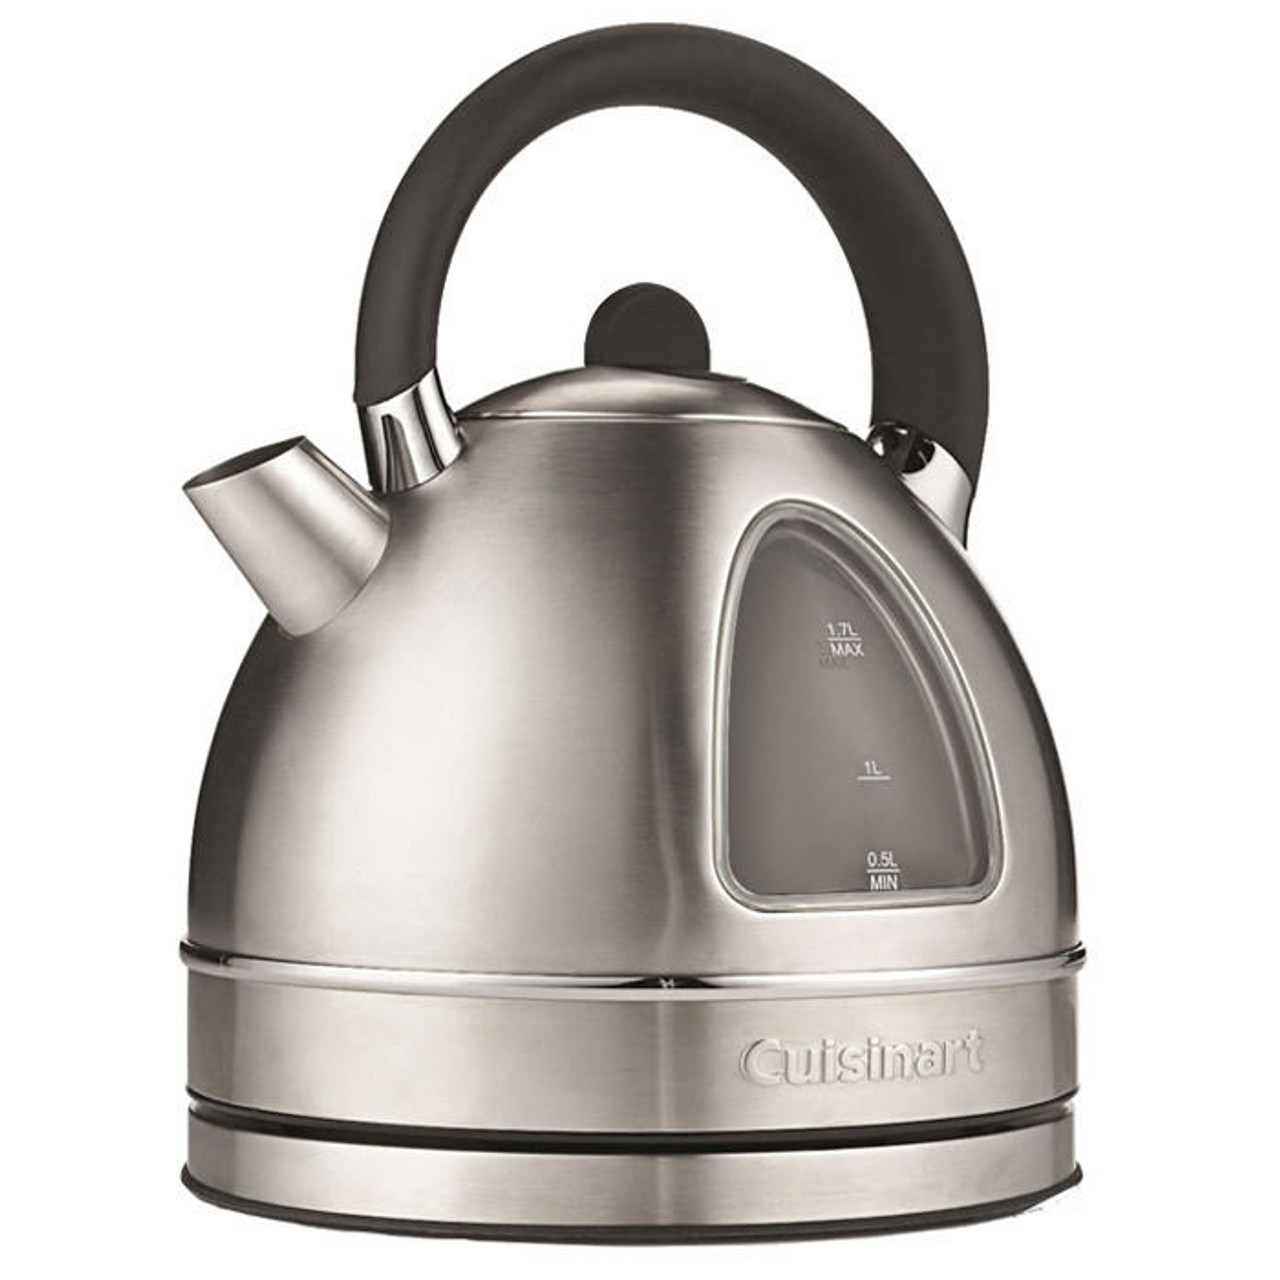 https://cdn11.bigcommerce.com/s-p82jn6co/images/stencil/1280x1280/products/7272/51453/32249-cuisinart-cordless-electric-kettle-stainless-steel-1.7l__58915.1703366456.jpg?c=2